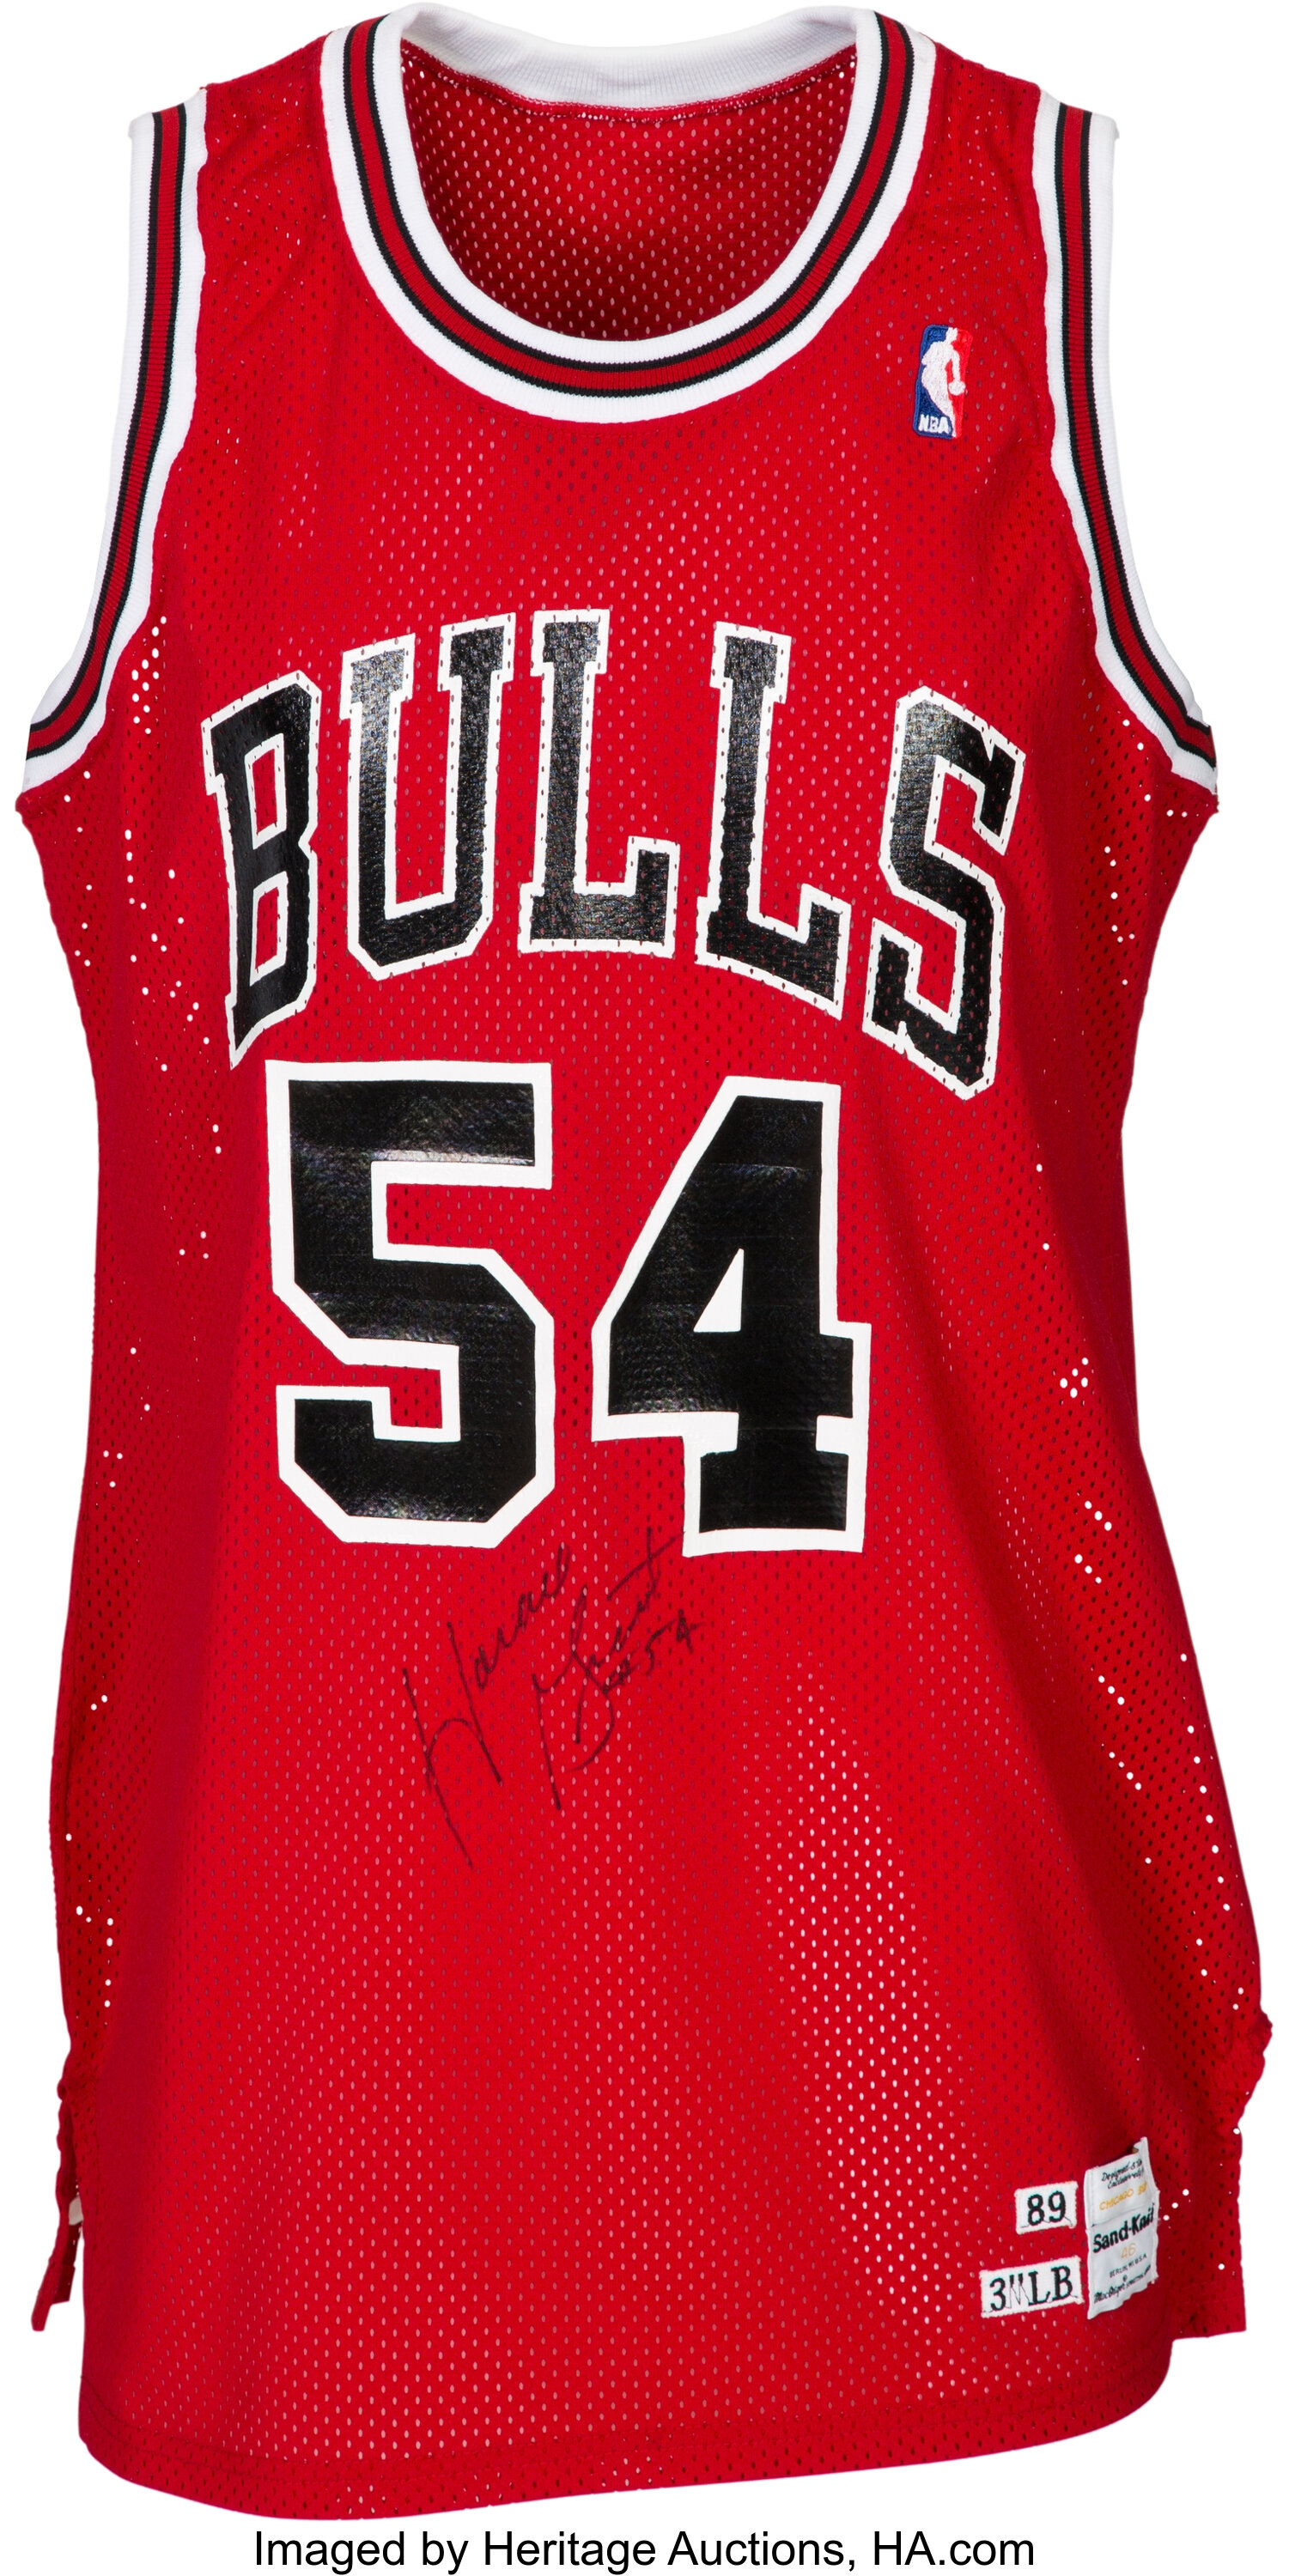 Horace Grant's Chicago Bulls 1993 Championship Ring to auction for